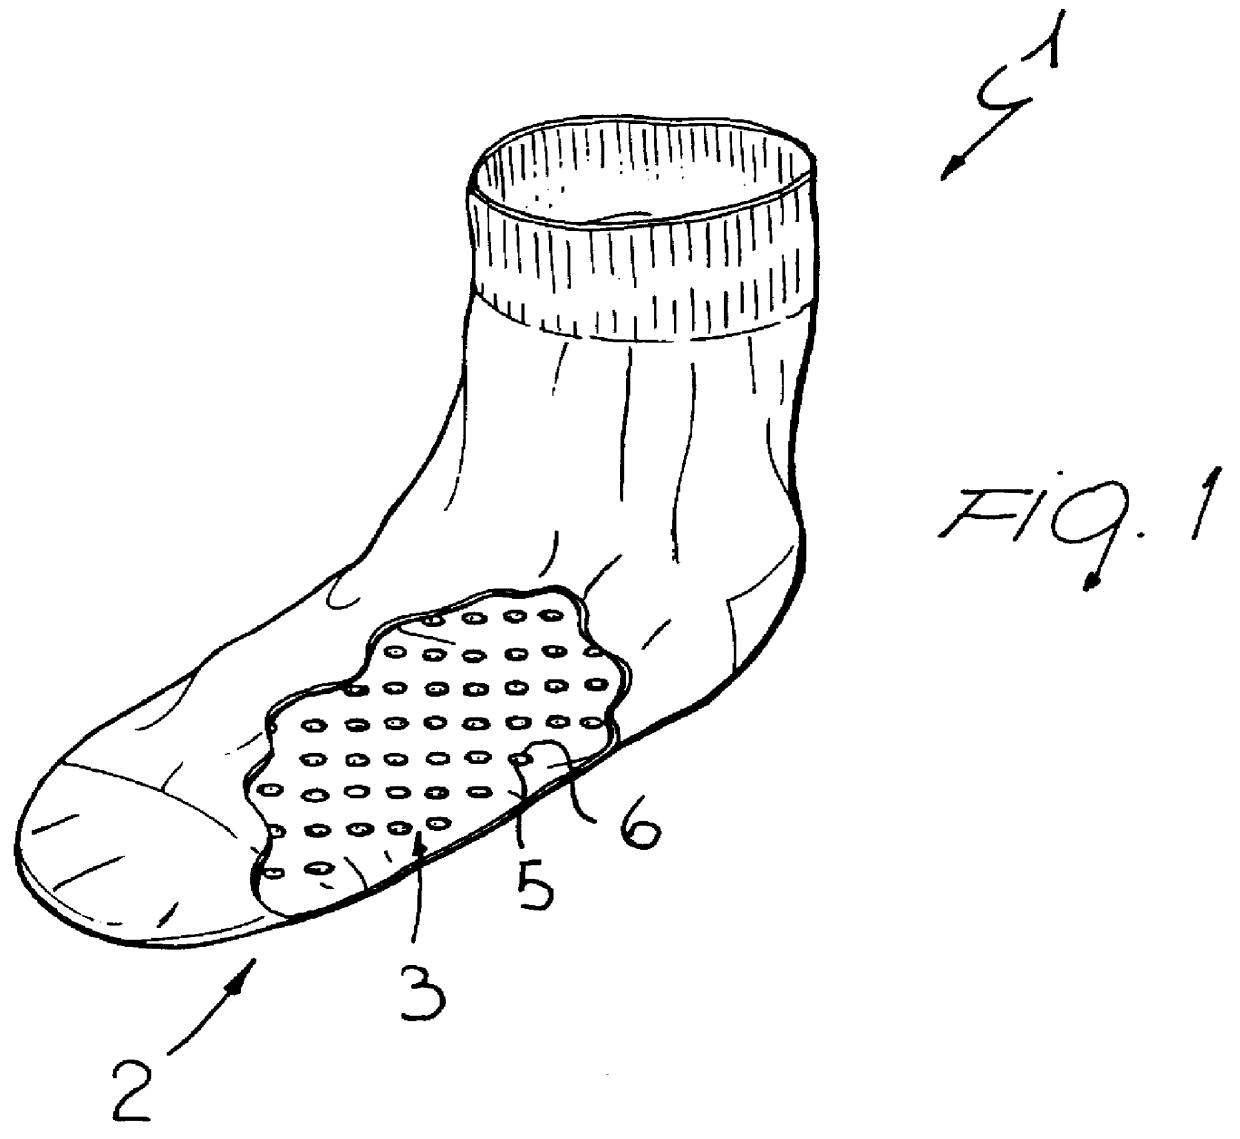 Sock with improved comfort